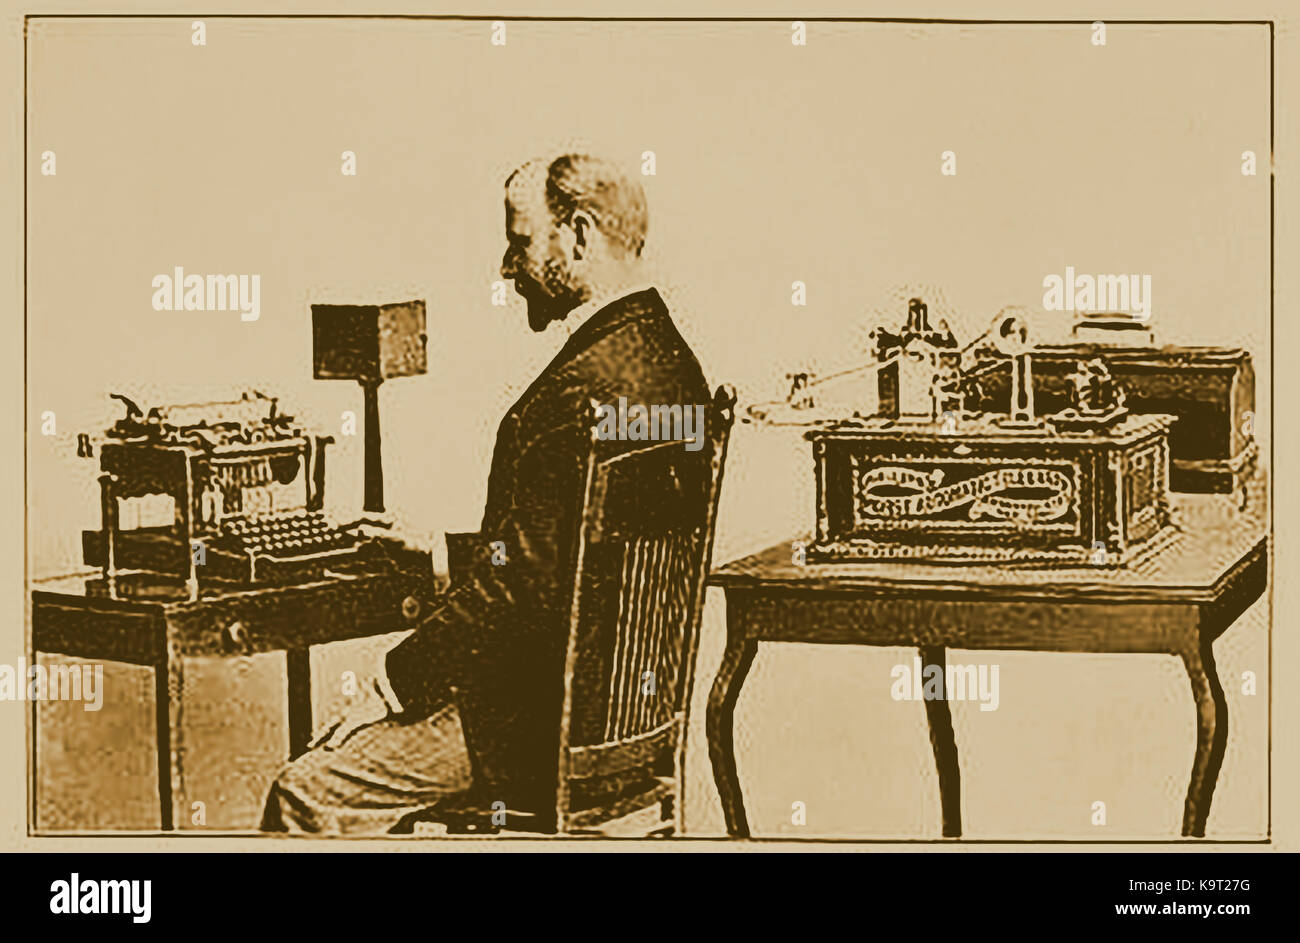 1897 - Telegraphy -  A man using a self teaching kit and learning how to operate the new technological invention of the telegraph using a Remington keyboard Stock Photo